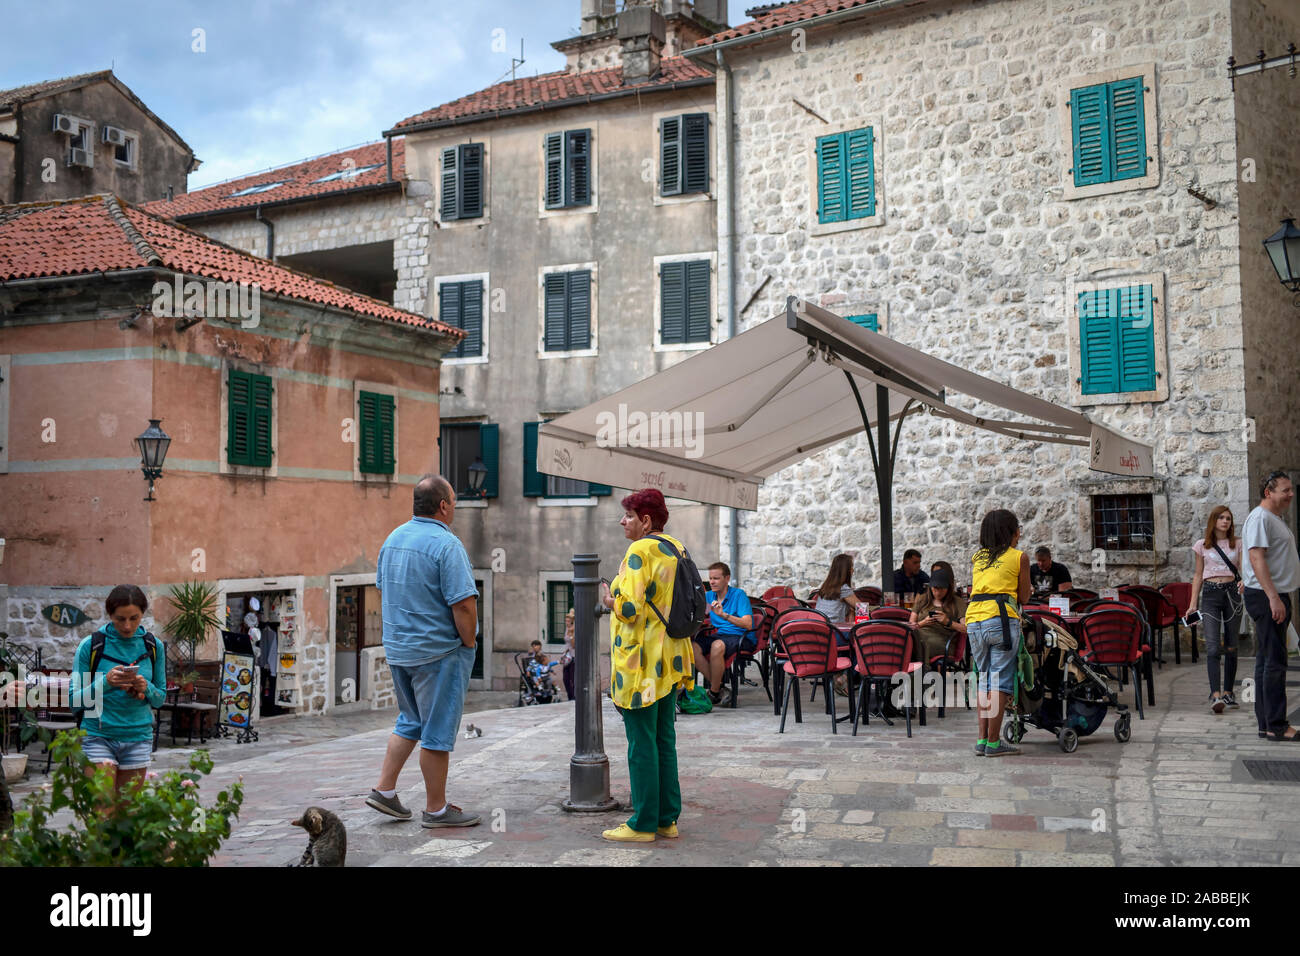 Montenegro, Sep 22, 2019: One of the squares with outdoor cafes in Kotor Old Town Stock Photo